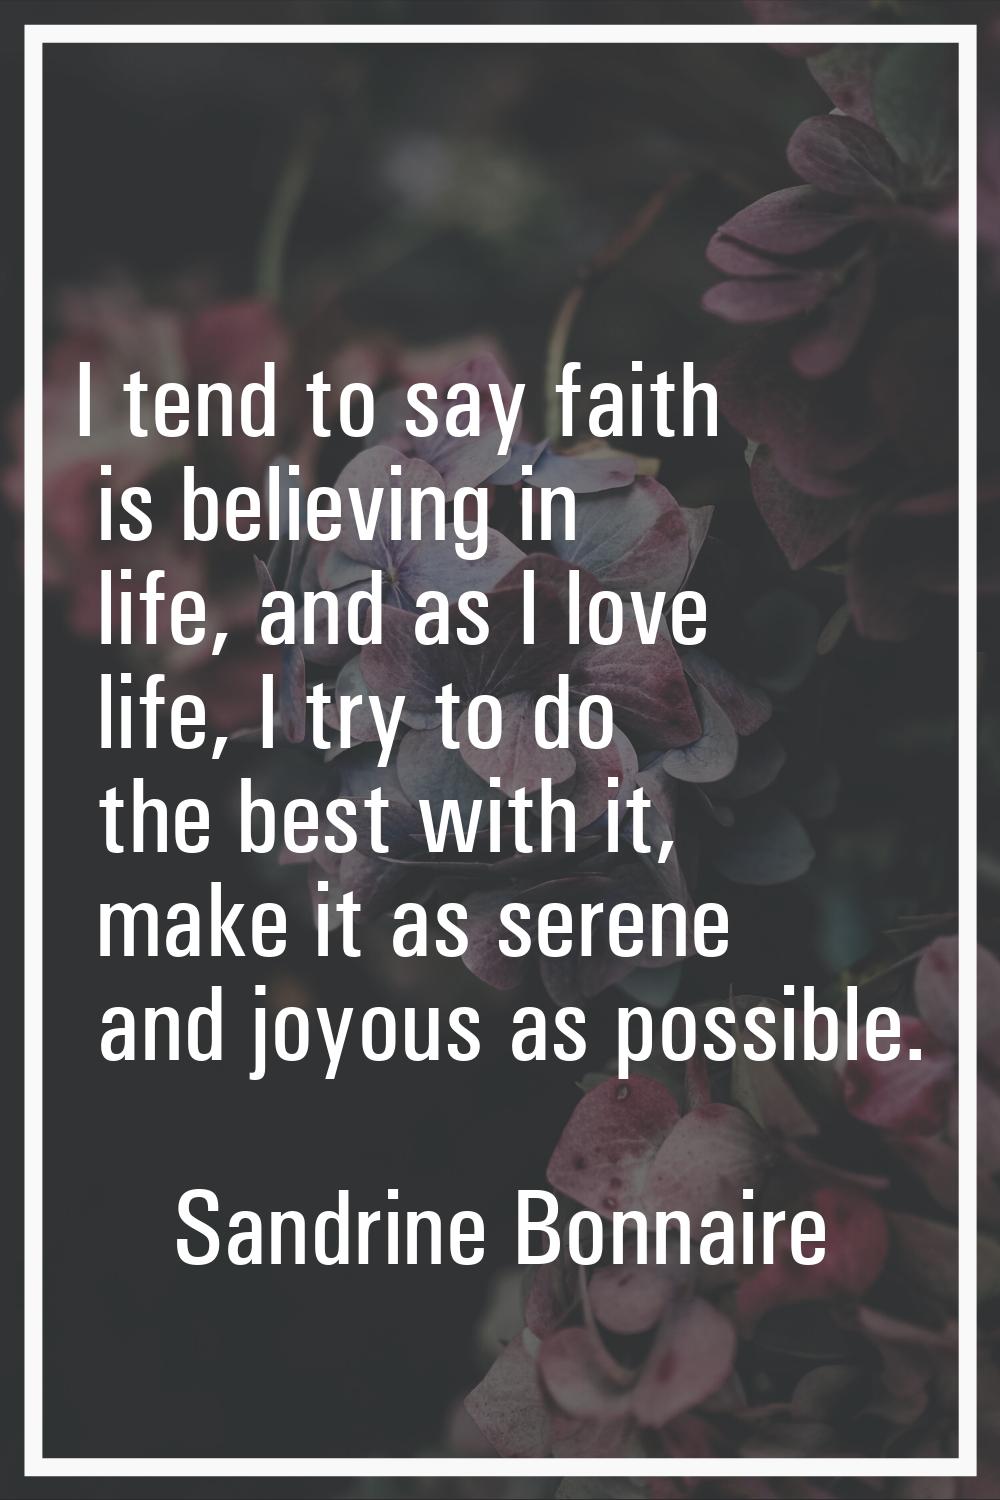 I tend to say faith is believing in life, and as I love life, I try to do the best with it, make it